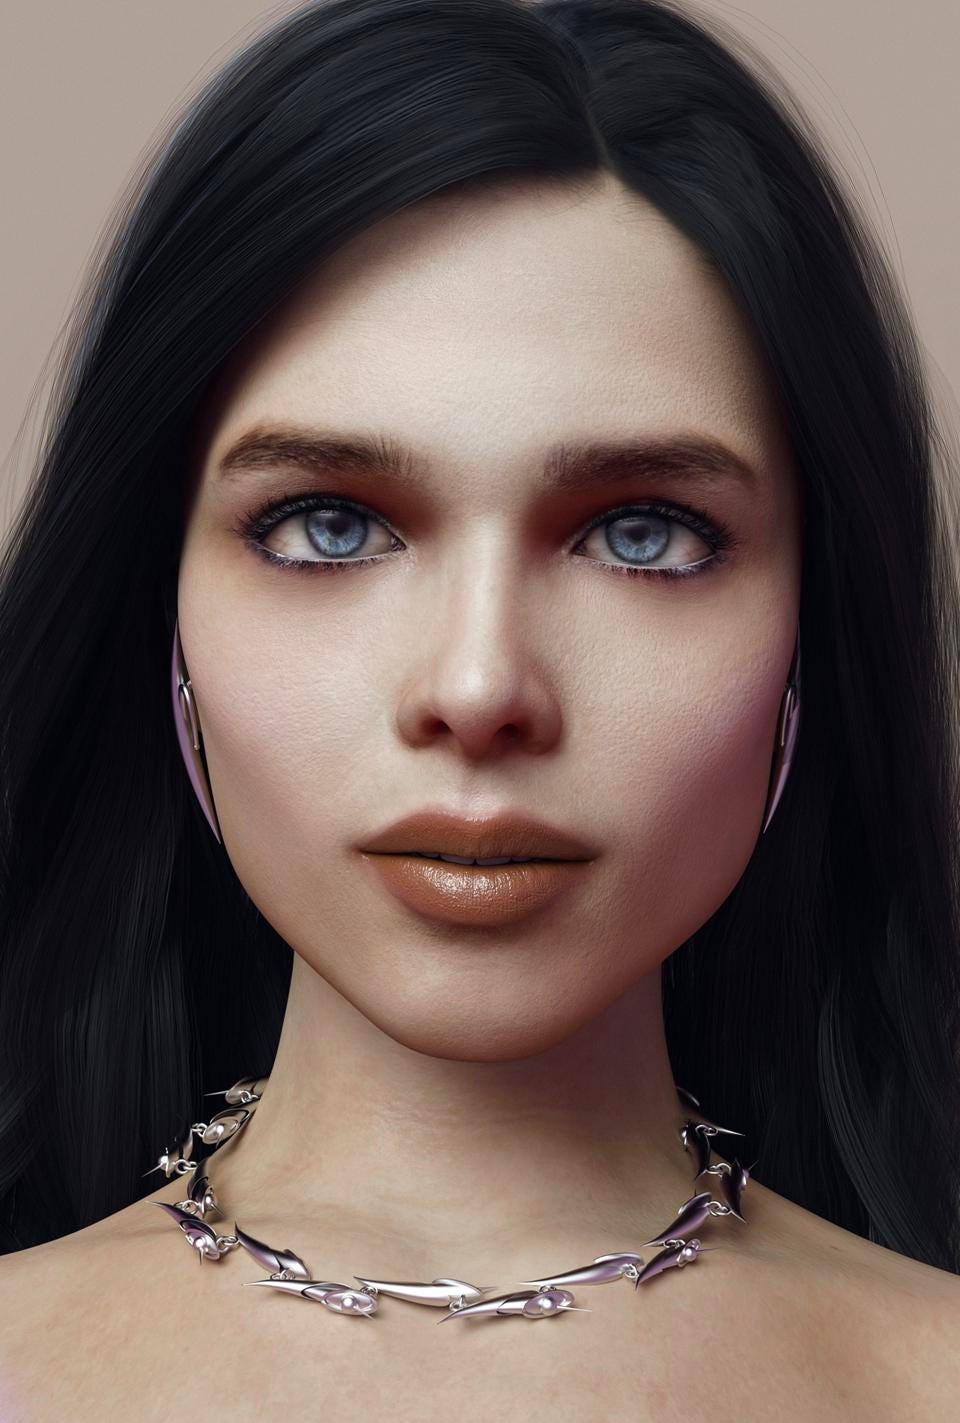 Photgenics is making avatars of its top models in the metavers.